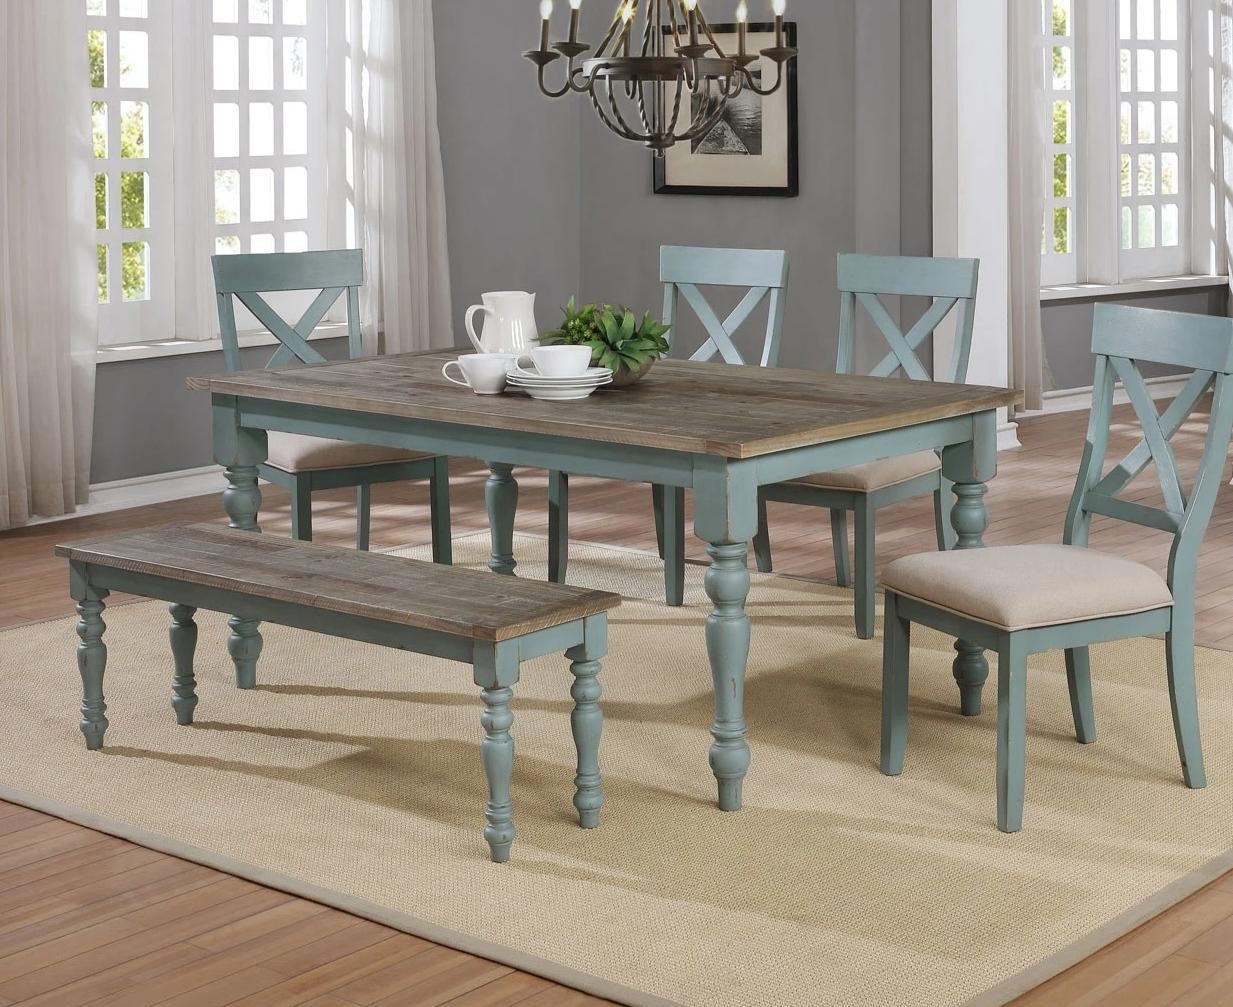 Robins egg farmhouse table dining set my furniture place 1